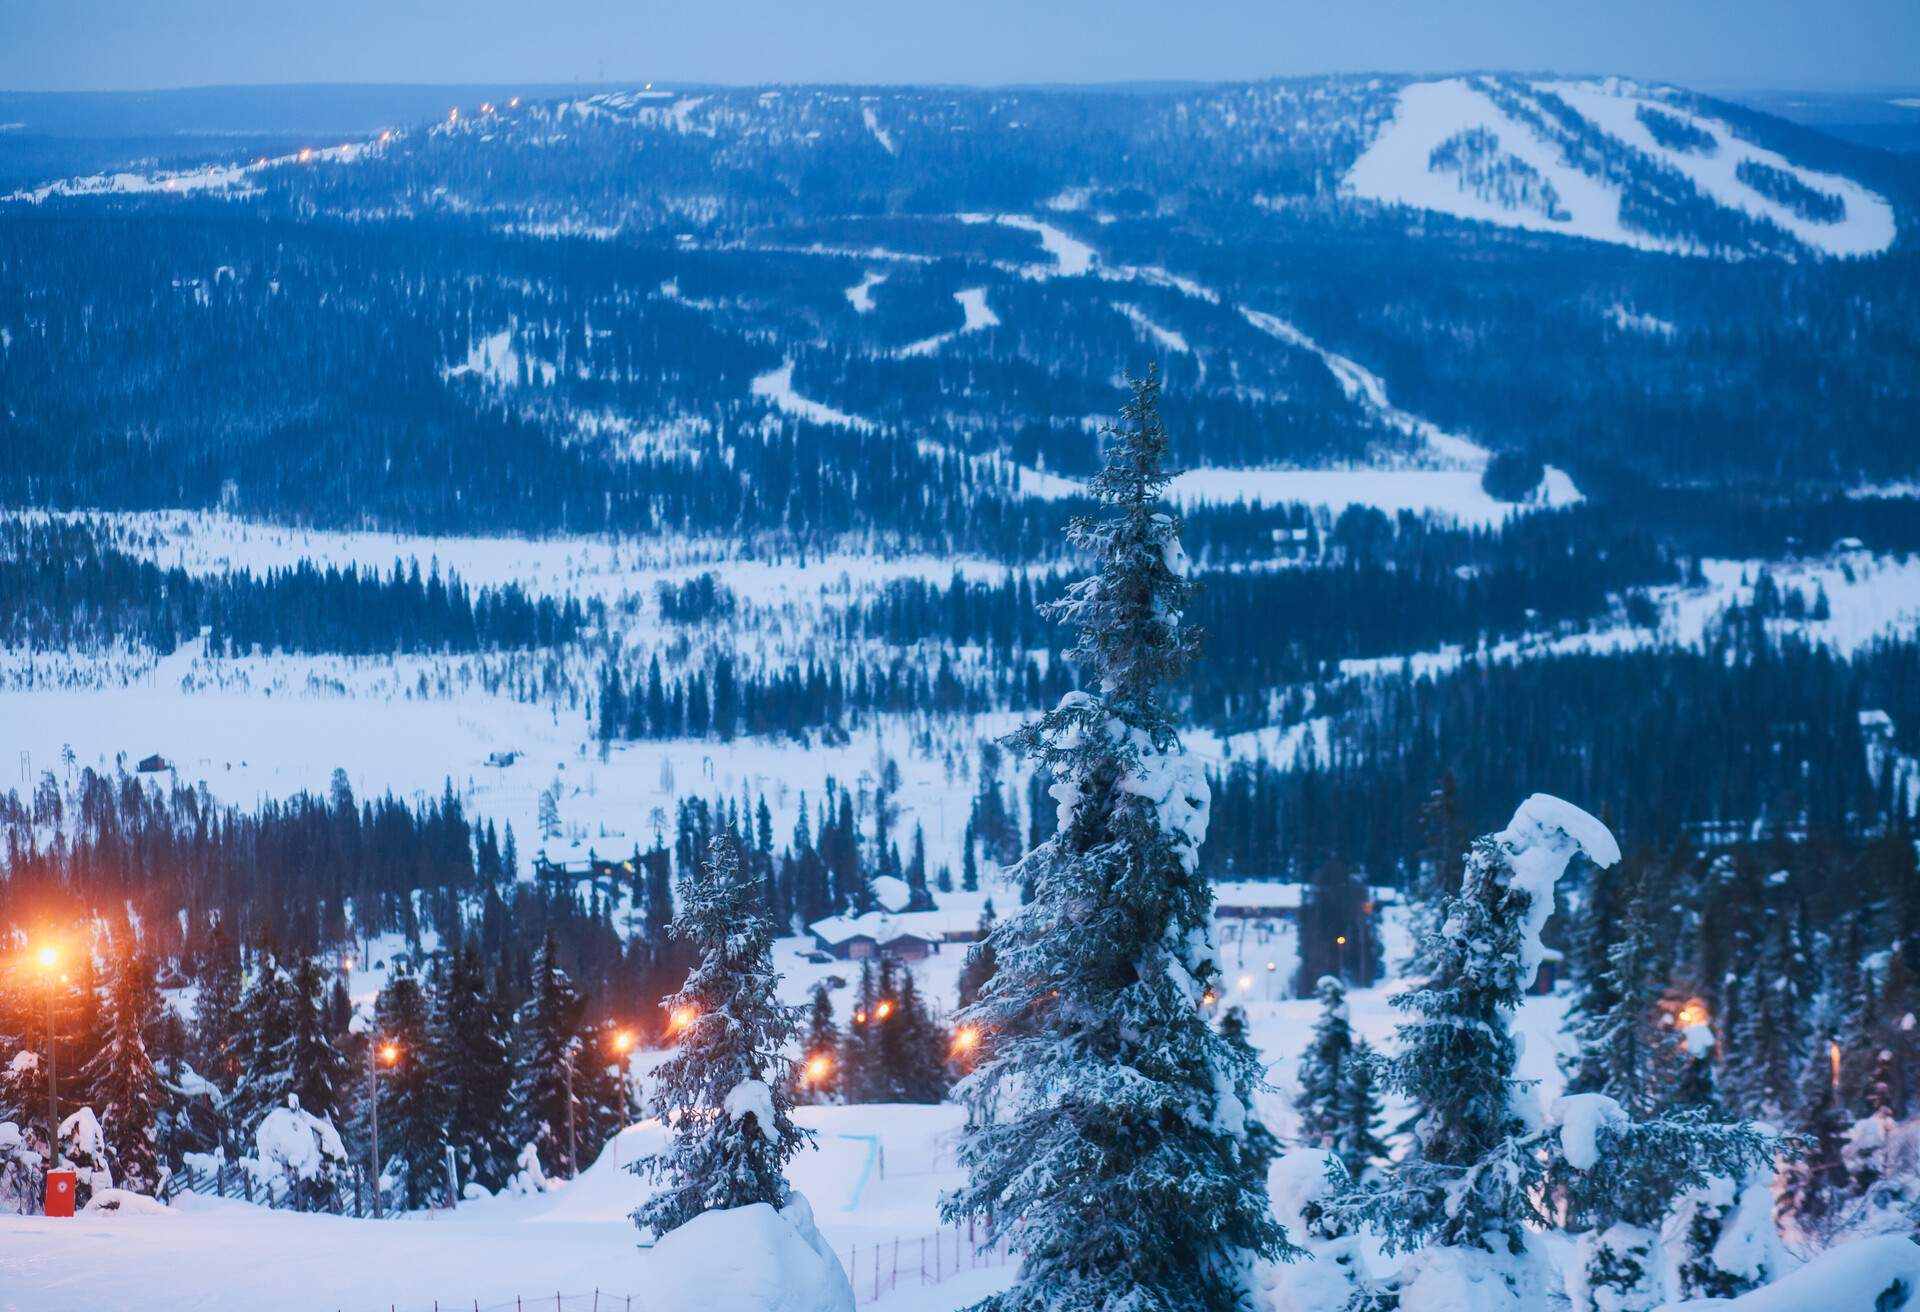 Street lamps with bright lights on a ski resort surrounded by a frozen forest.